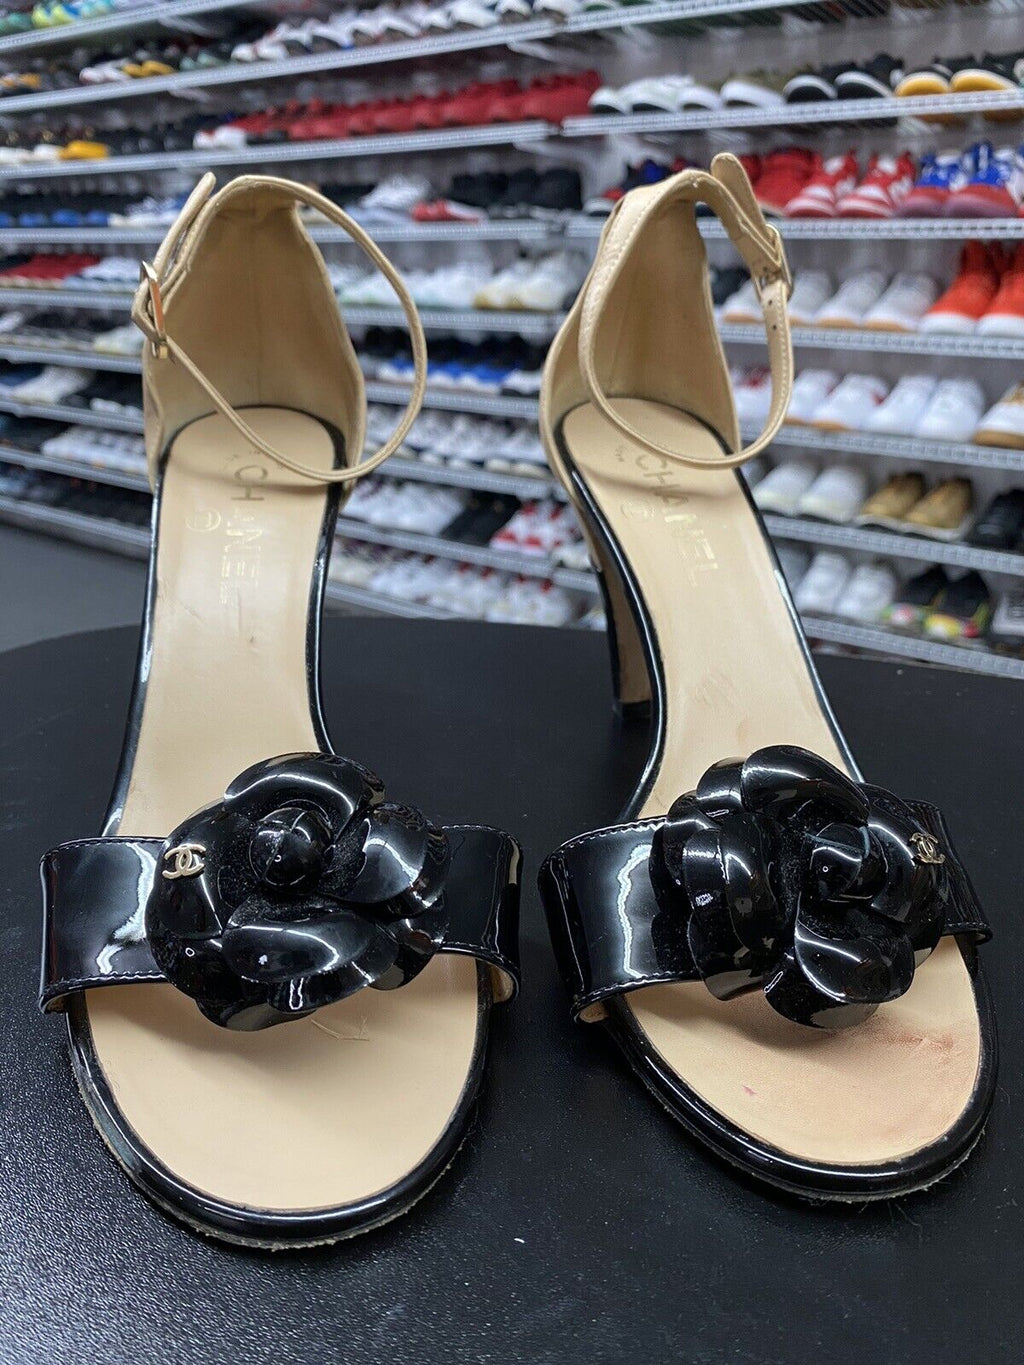 Chanel Black Leather Camellia Ankle Strap Heel Flower Accent Size 40 EU 10 US - Hype Stew Sneakers Detroit